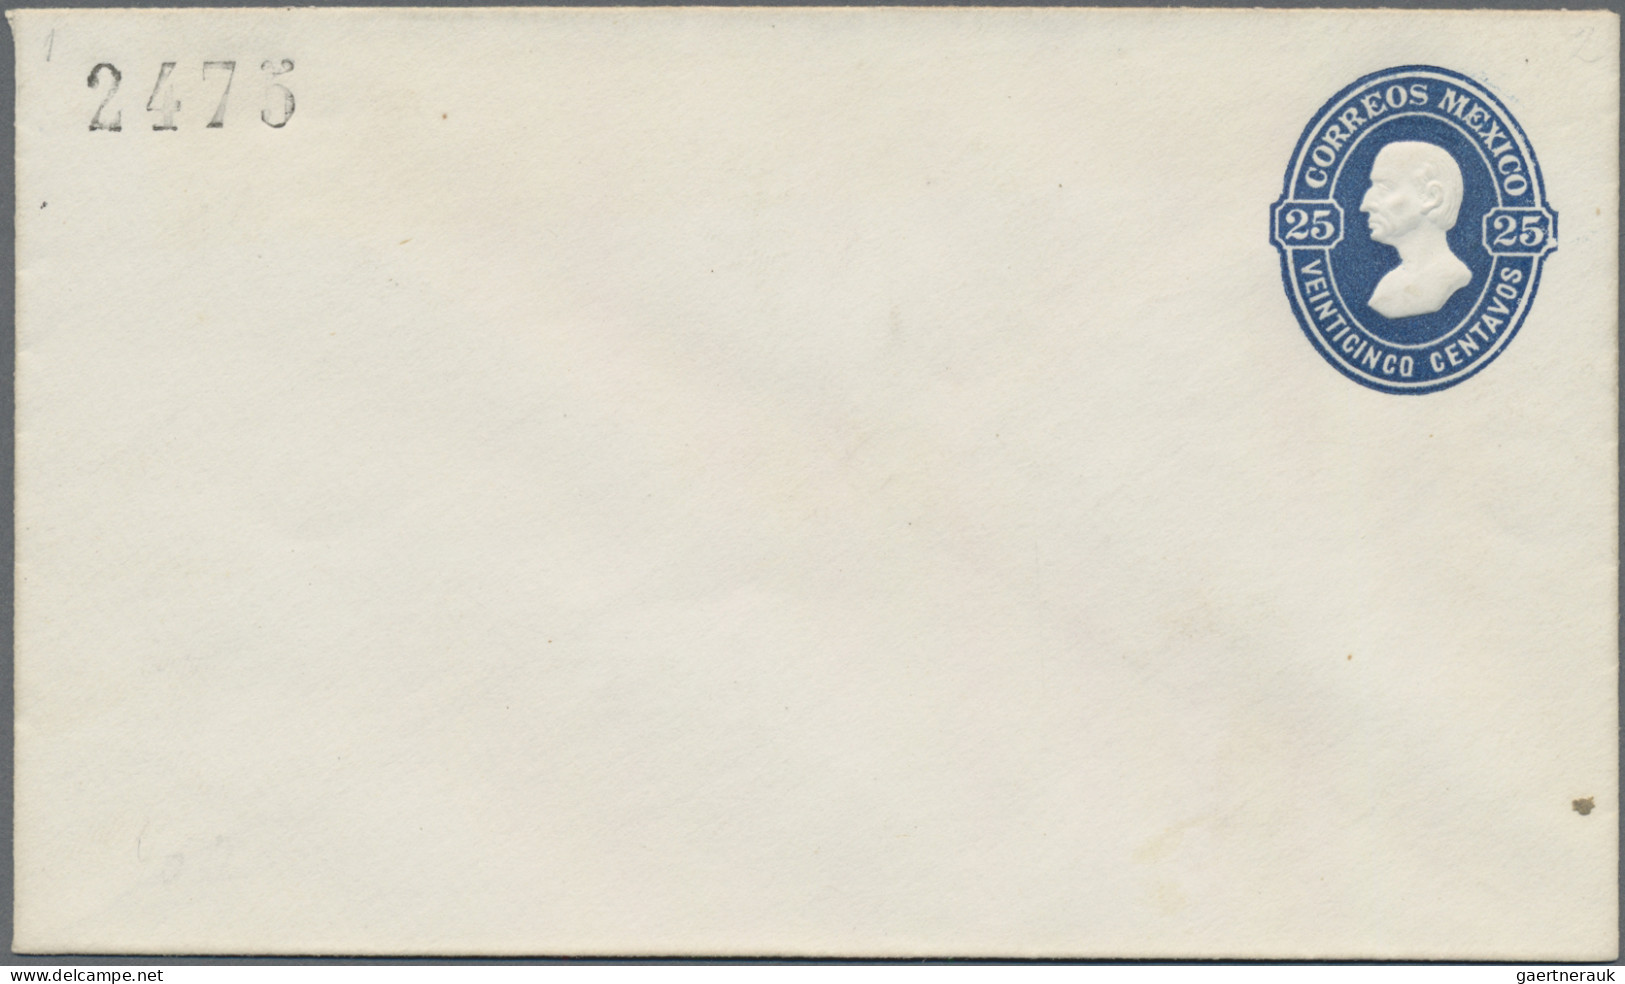 Mexico - Postal stationary: 1874/77, envelopes (8) of 10 C. or 25 C. with distri